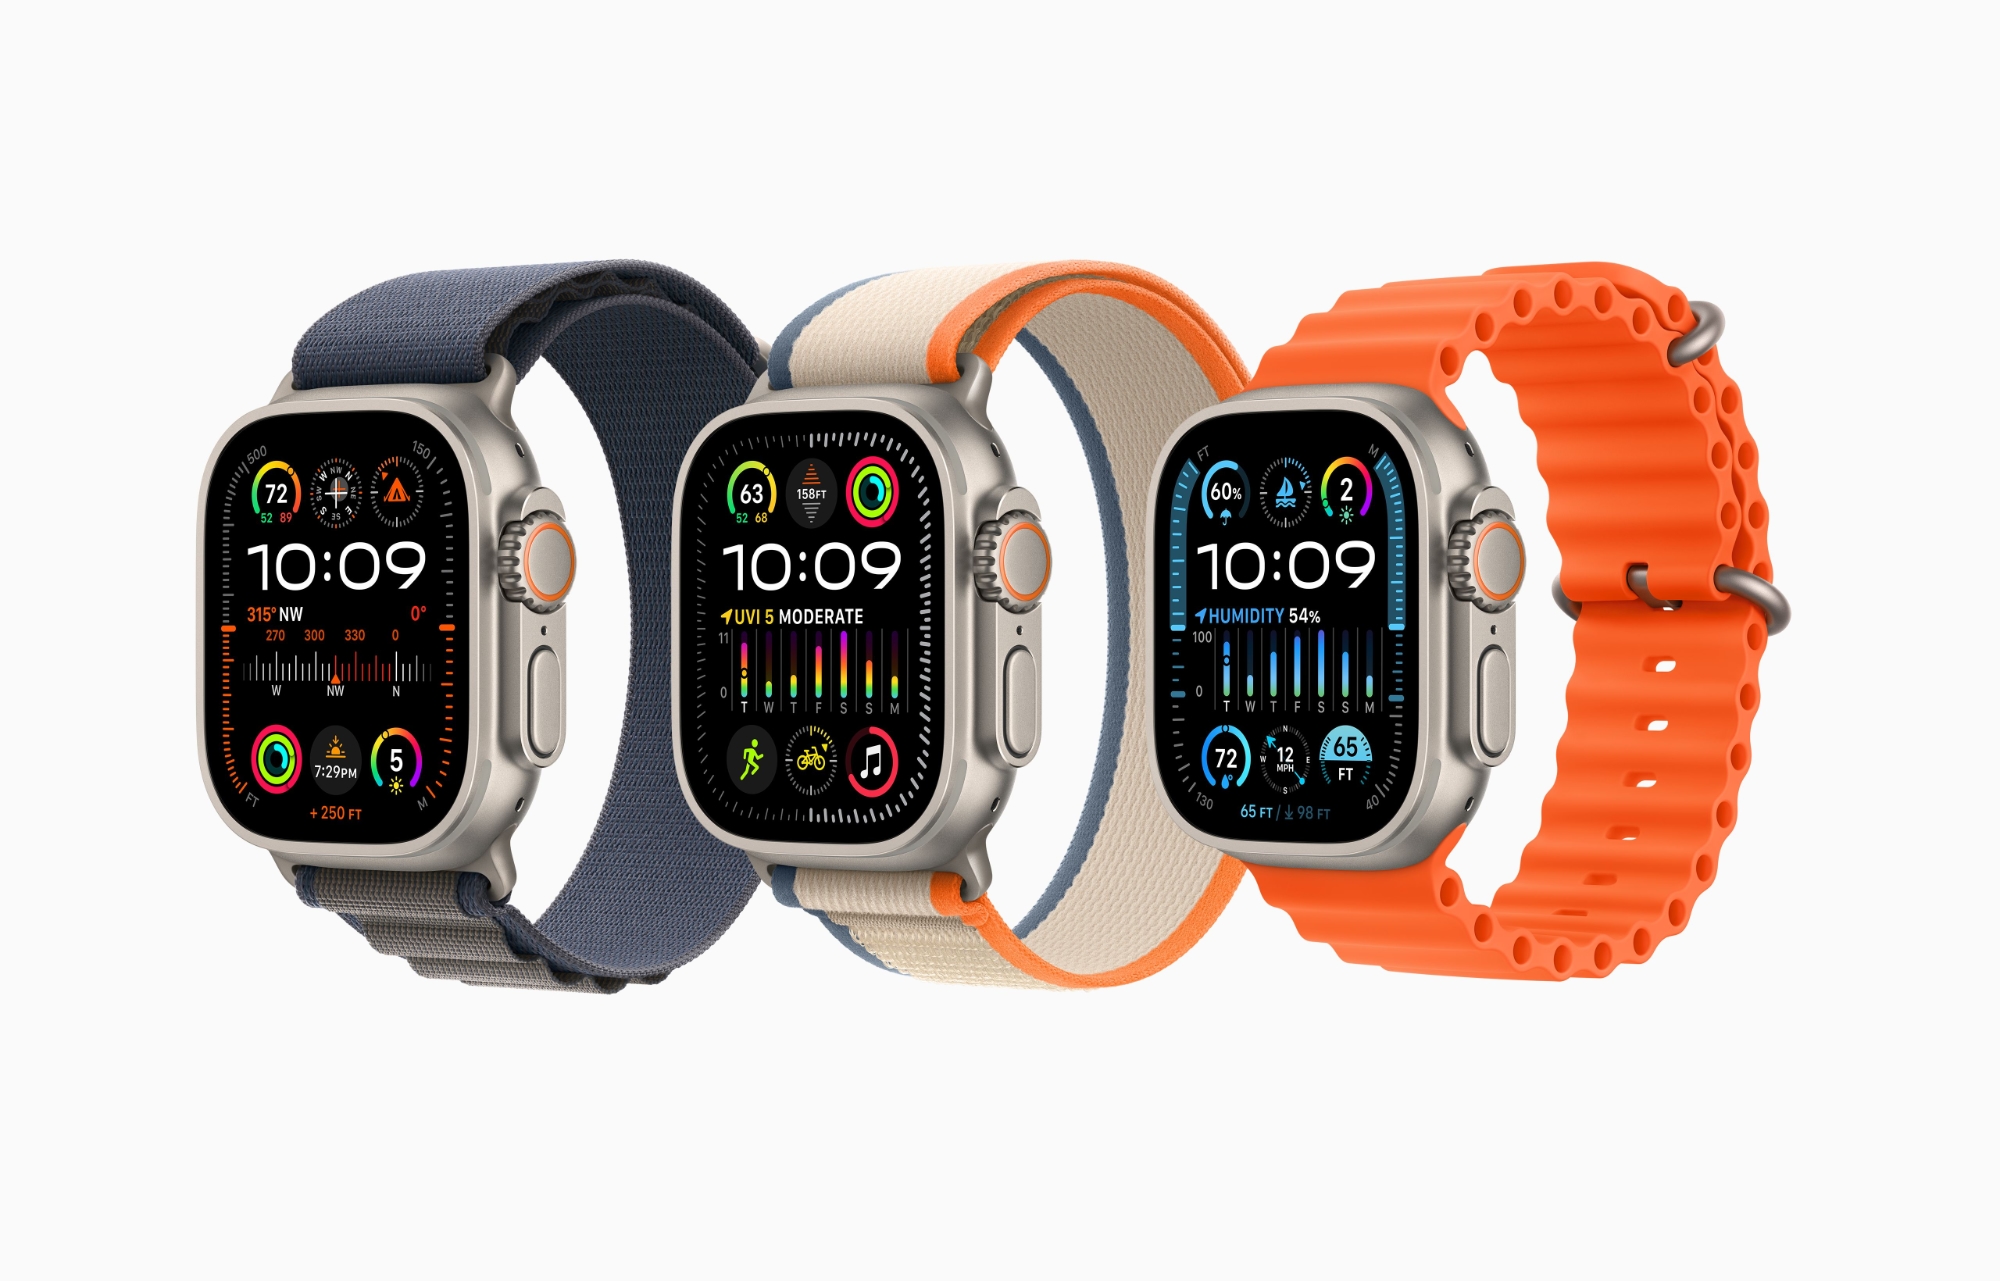 Apple Watch Ultra 2 can be bought on Amazon for a discounted price of $75